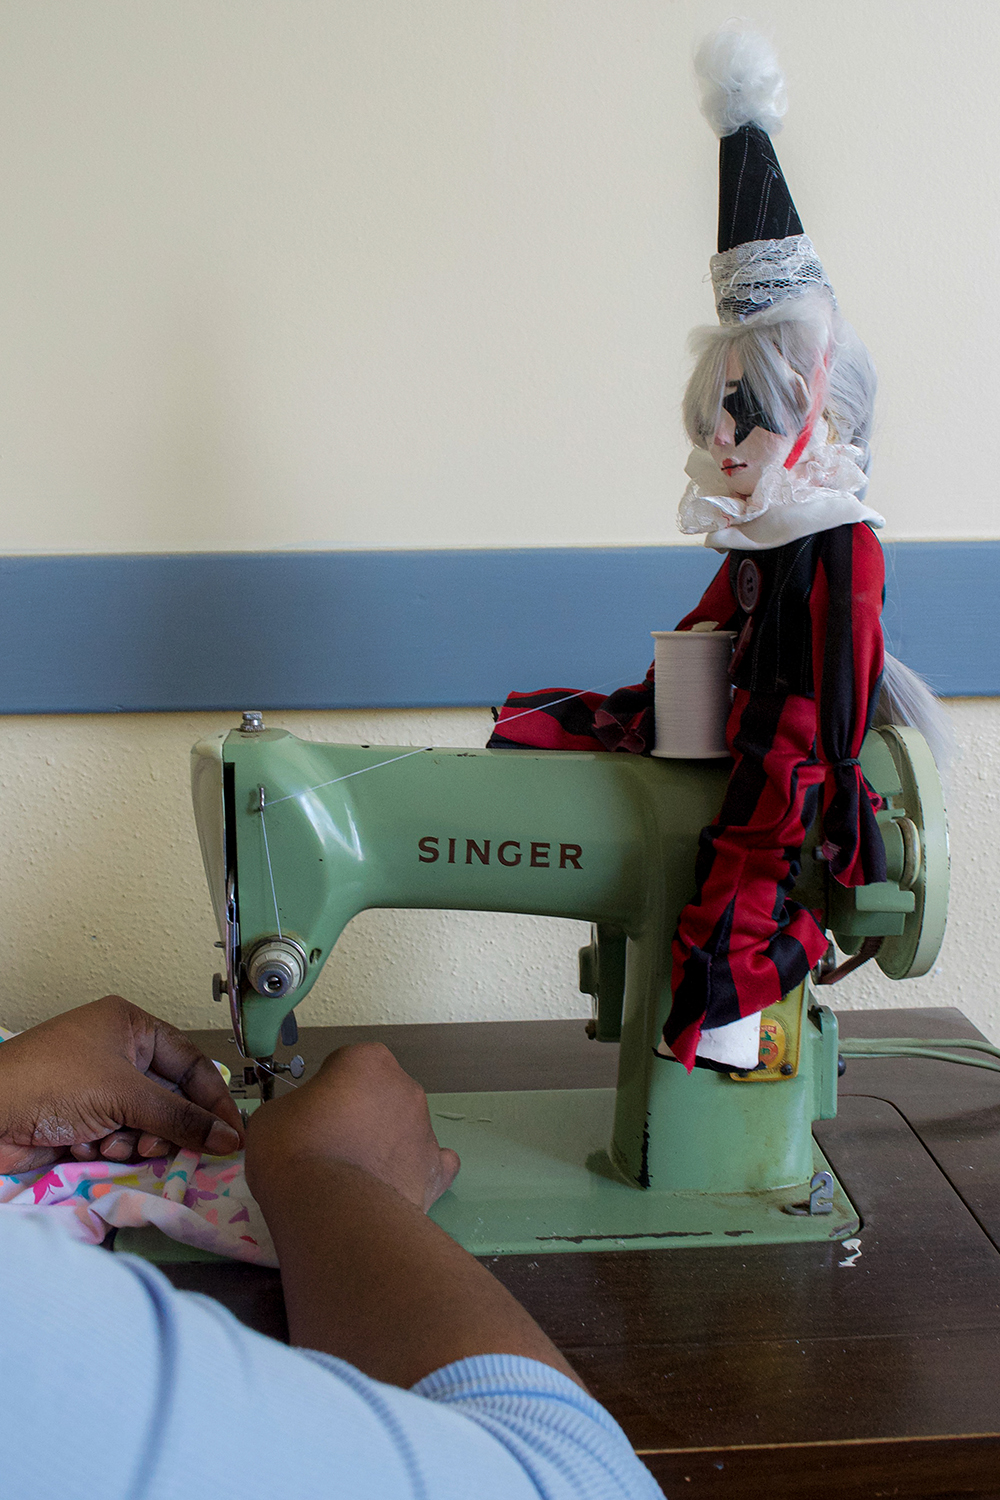 One of the artist's doll is sitting atop the sewing machine as the artist is working.